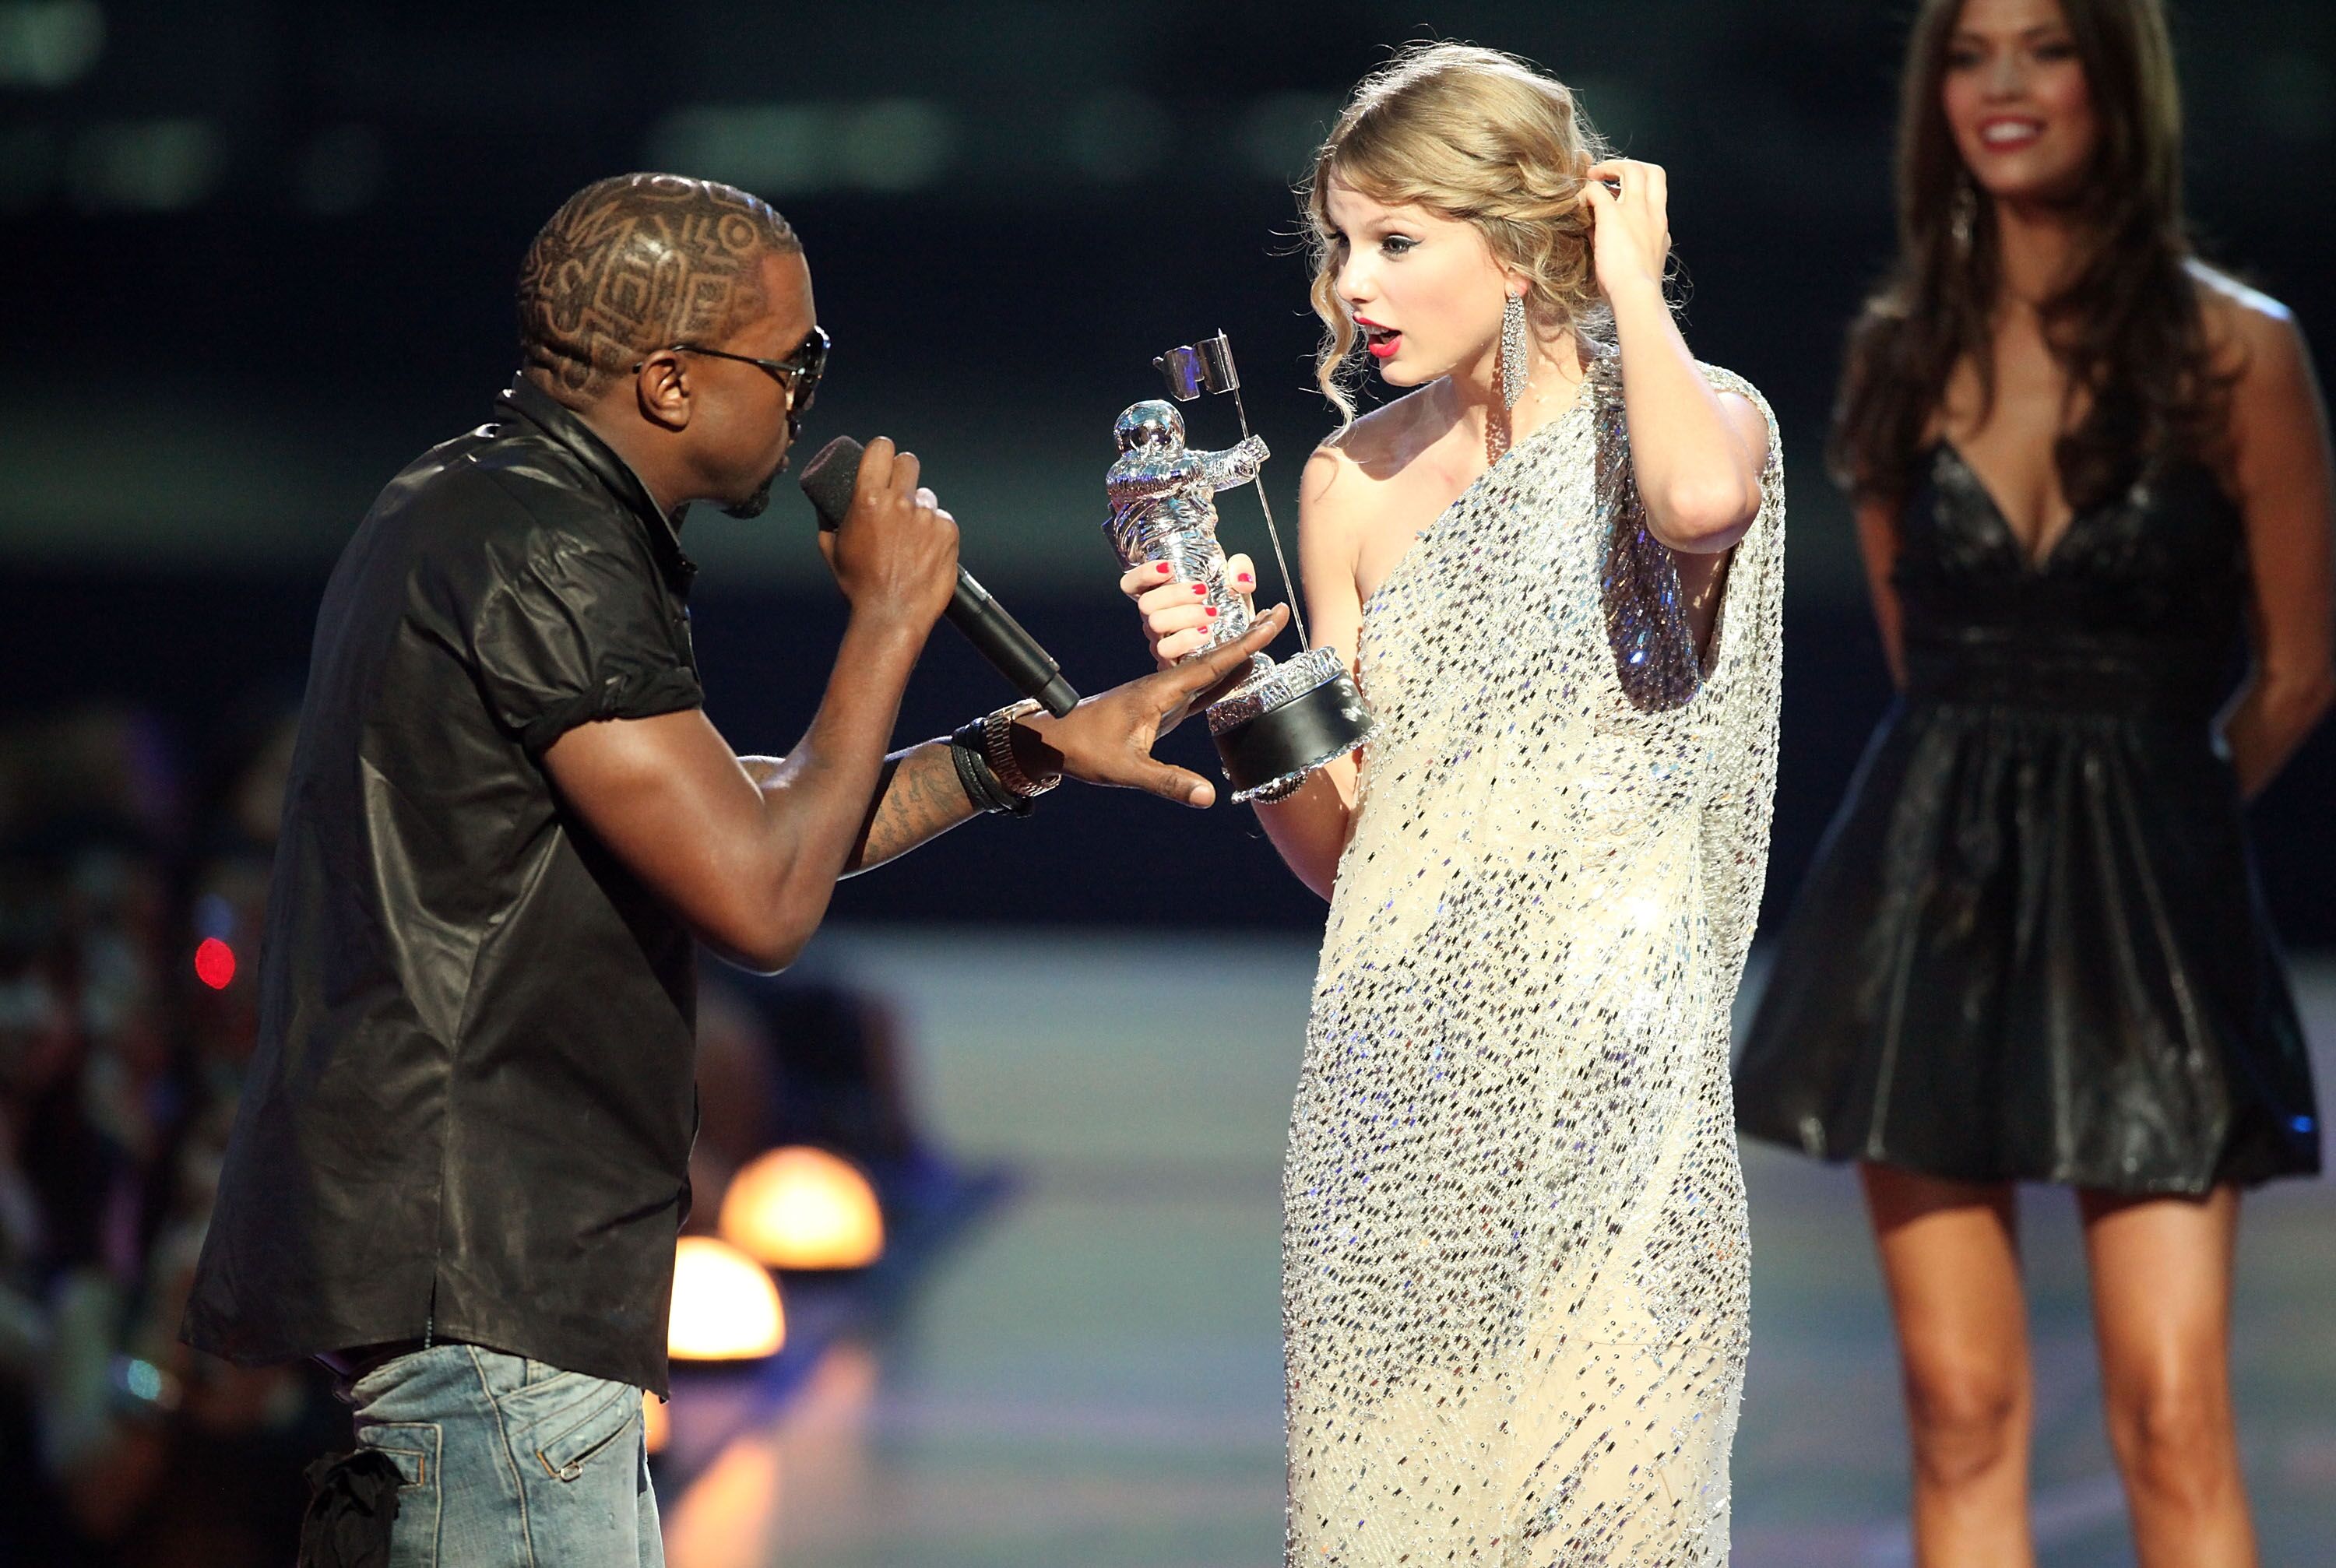 Kanye West jumps onstage after Taylor Swift won the "Best Female Video" award during the 2009 MTV Video Music Awards at Radio City Music Hall on September 13, 2009, in New York City. | Source: Getty Images.